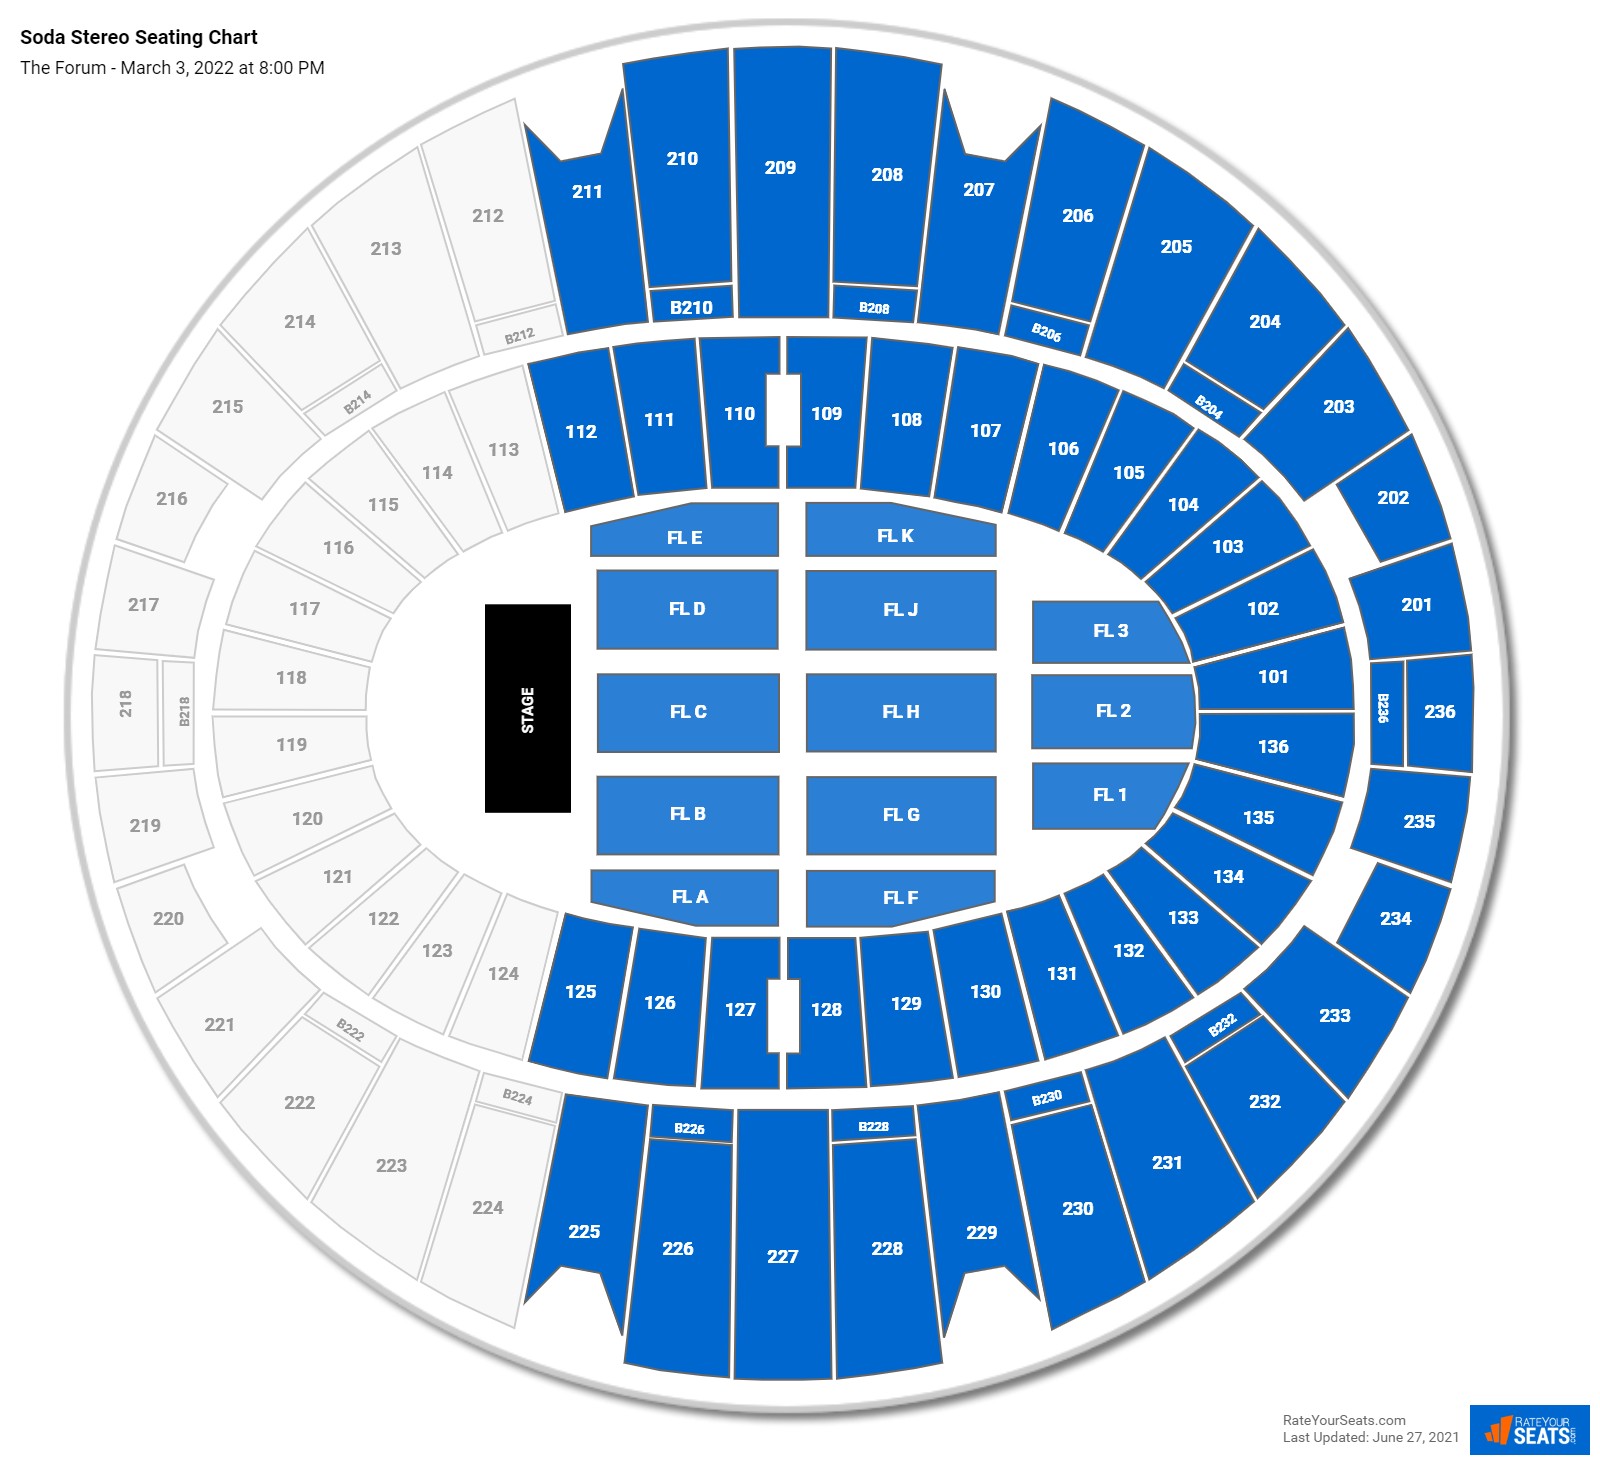 Soda Stereo seating chart The Forum.